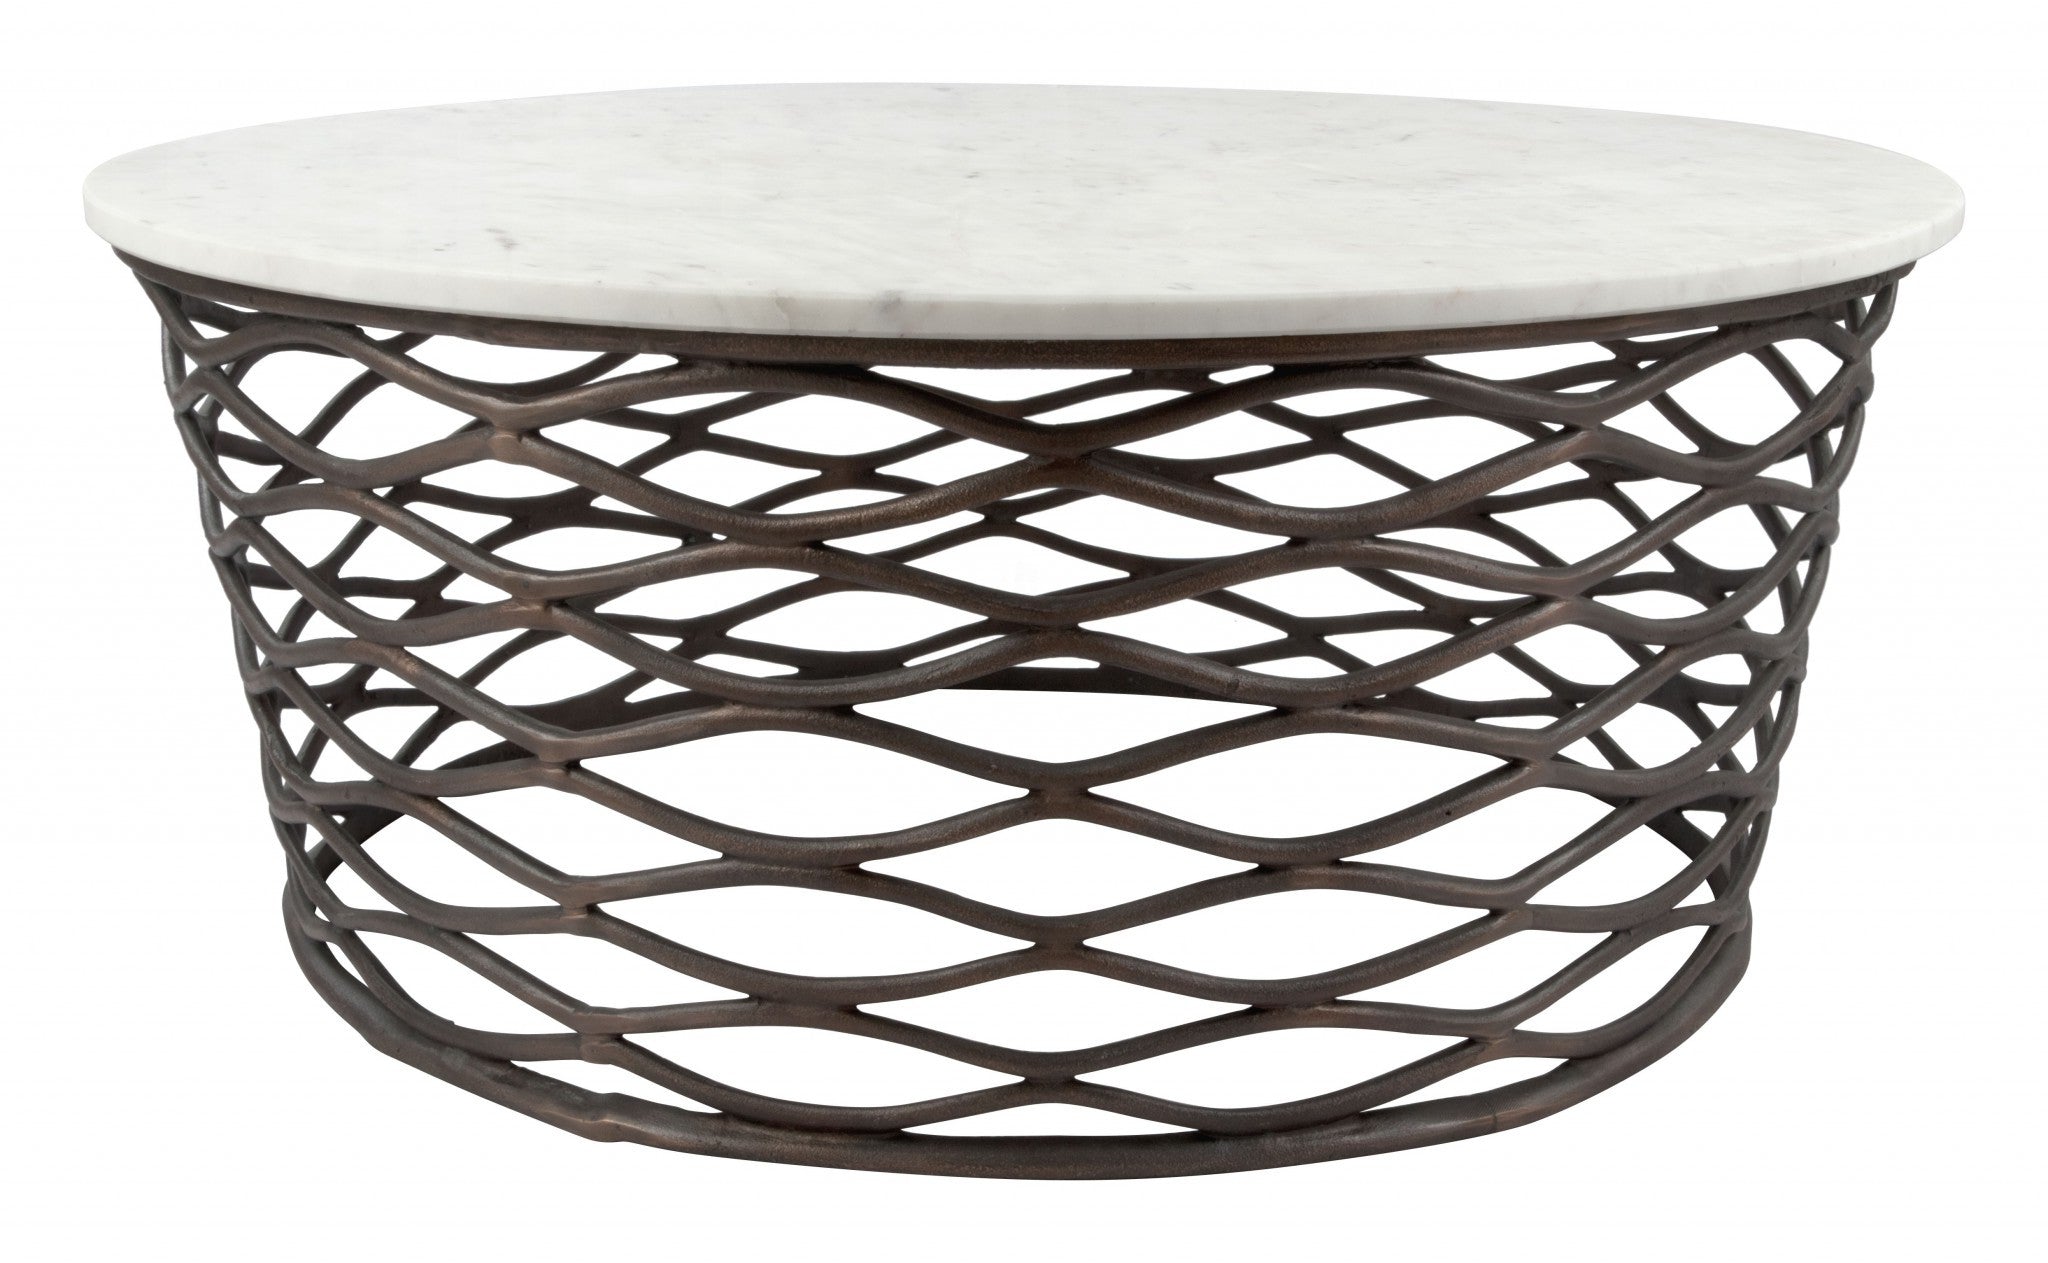 36" Antiqued Bronze And White Genuine Marble Round Coffee Table